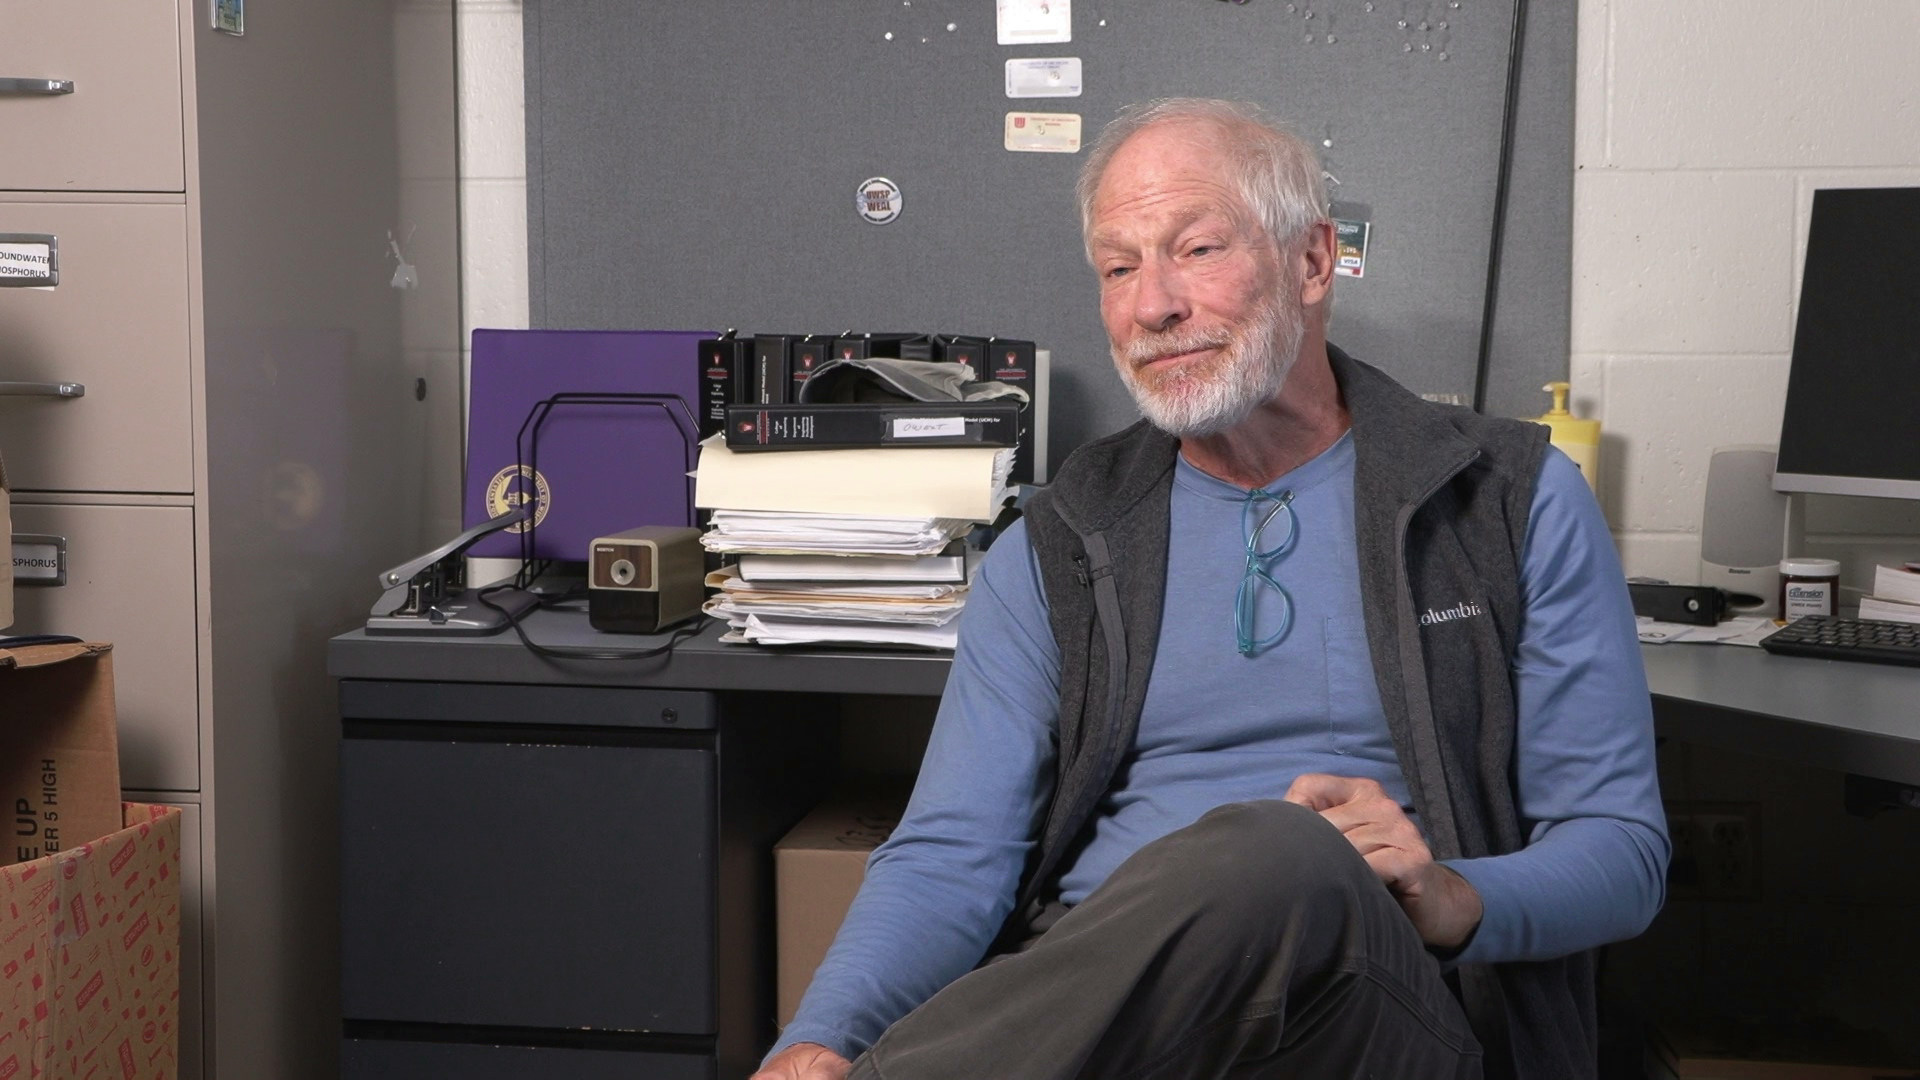 George Kraft sits in an office with a desk, metal filing cabinet, bulletin board and other items in the background.